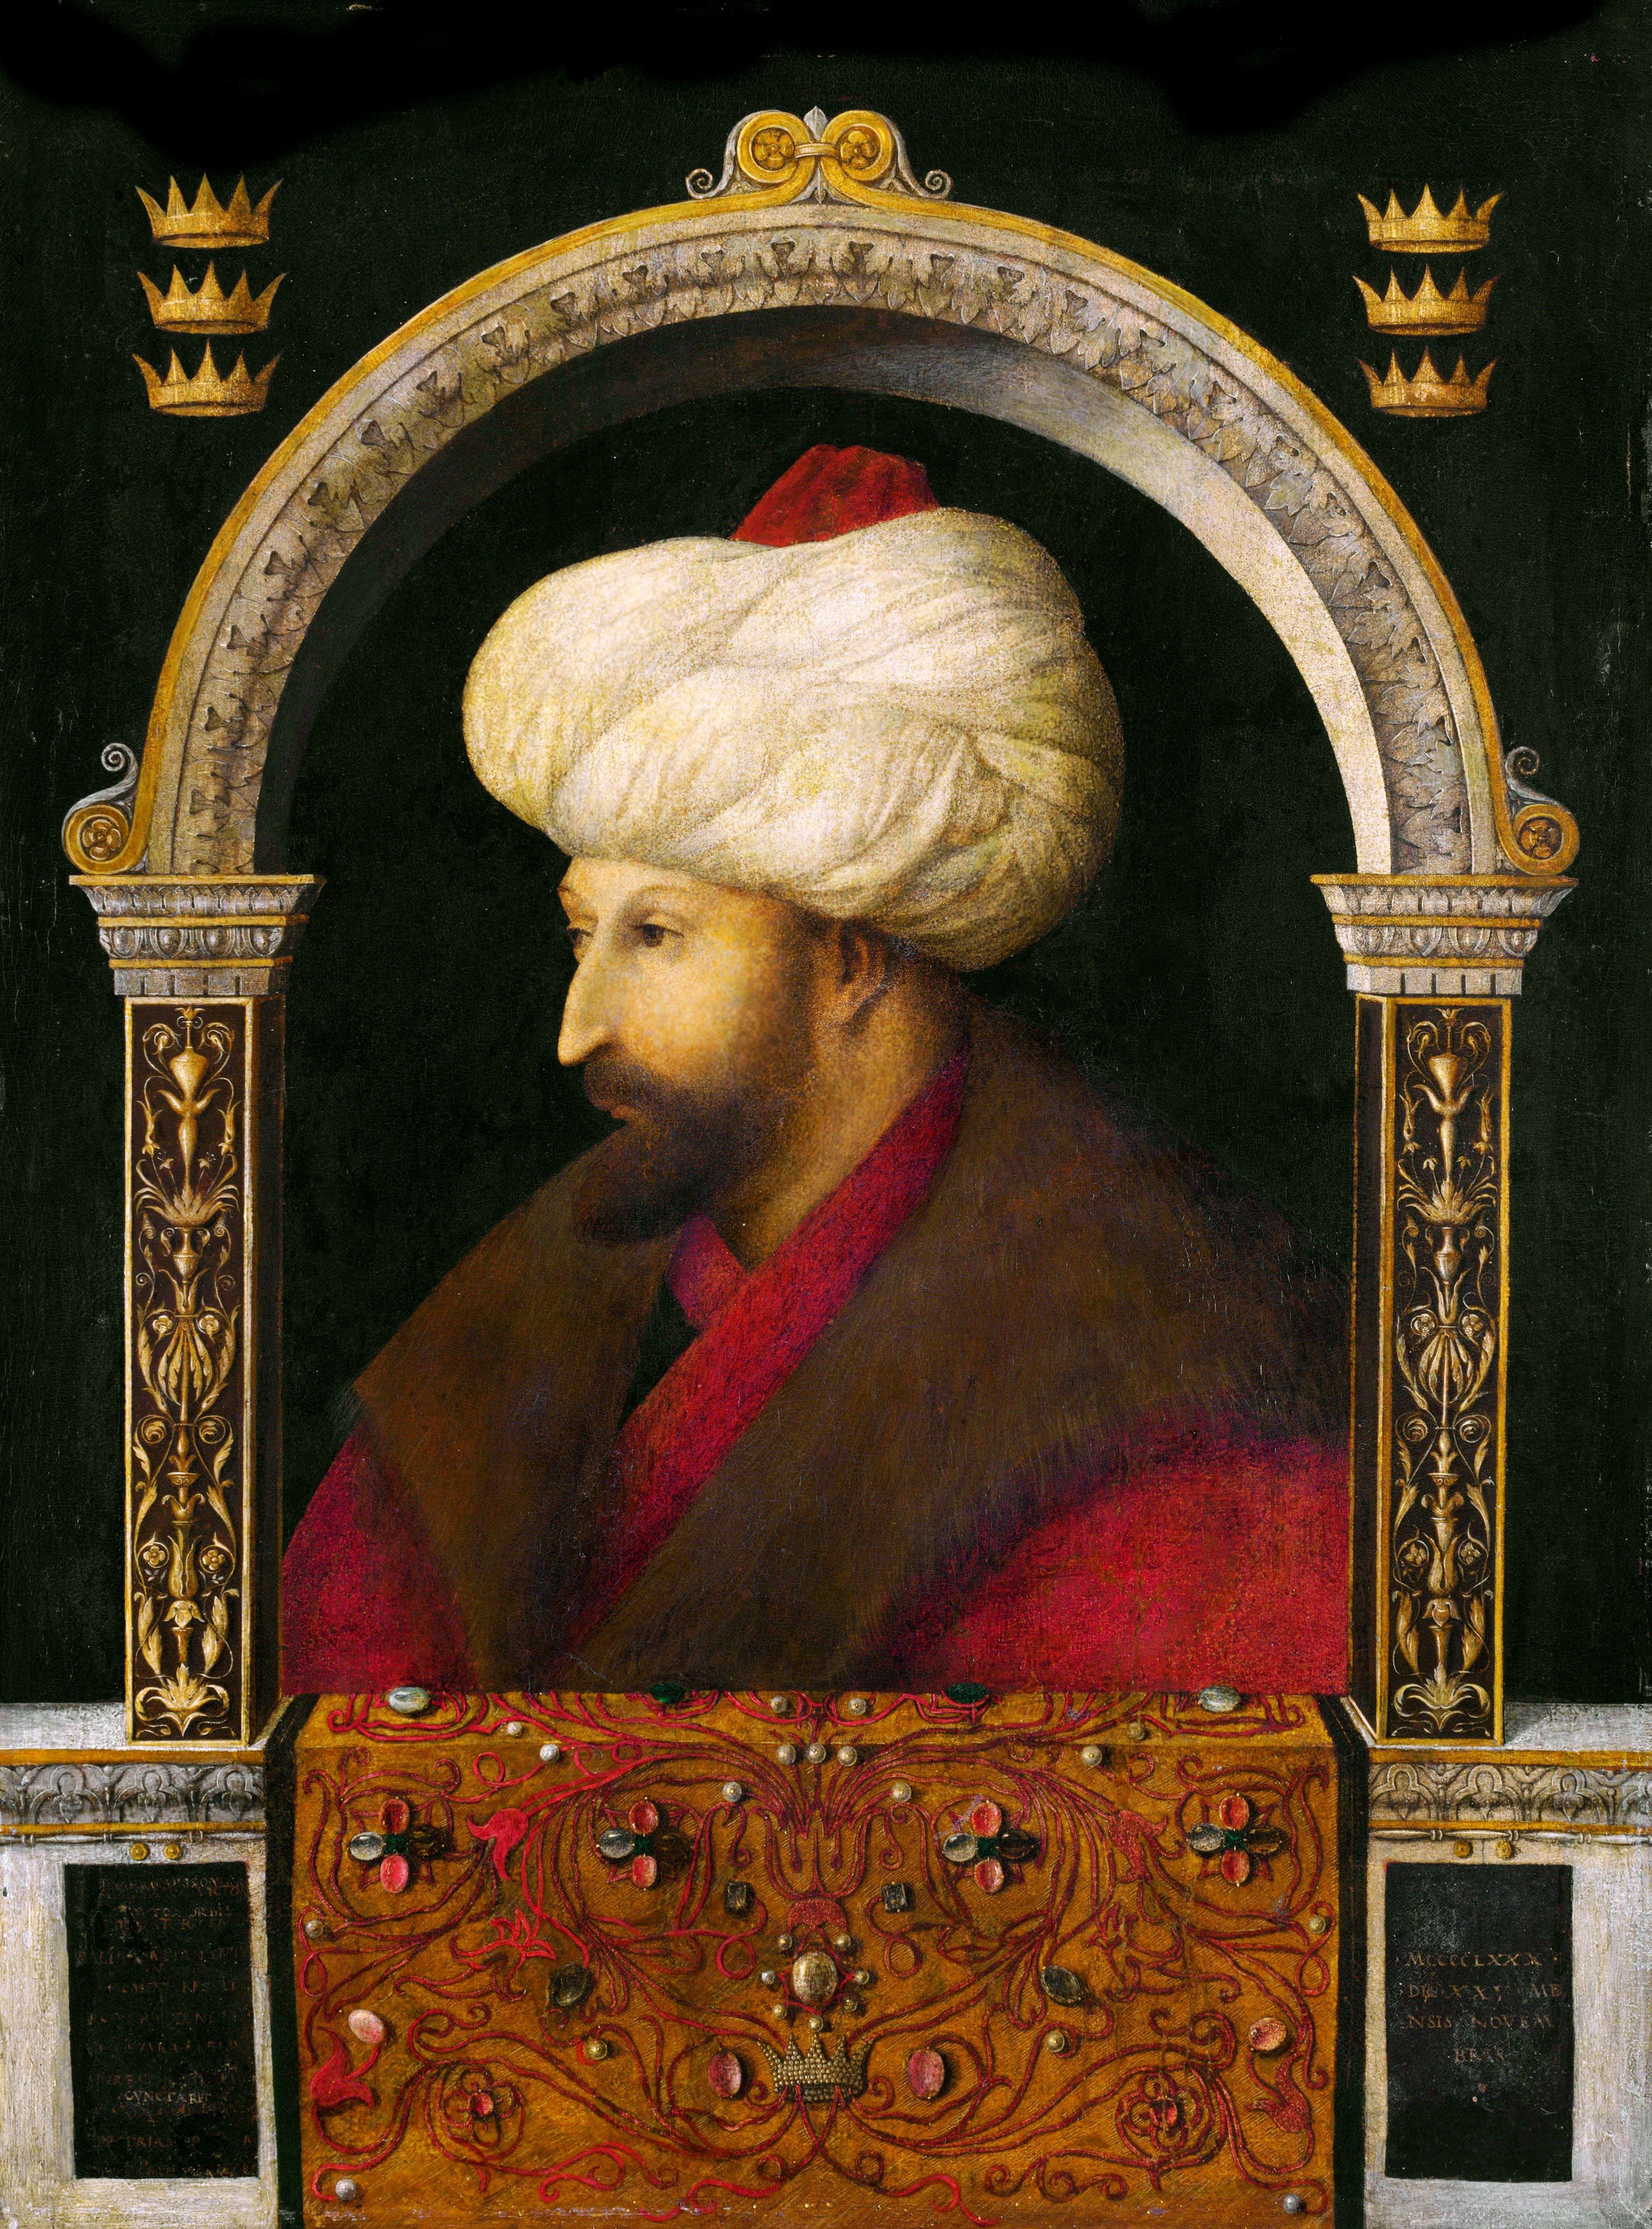 rediscovered portrait medallion of ottoman ruler valued at up to £2 million